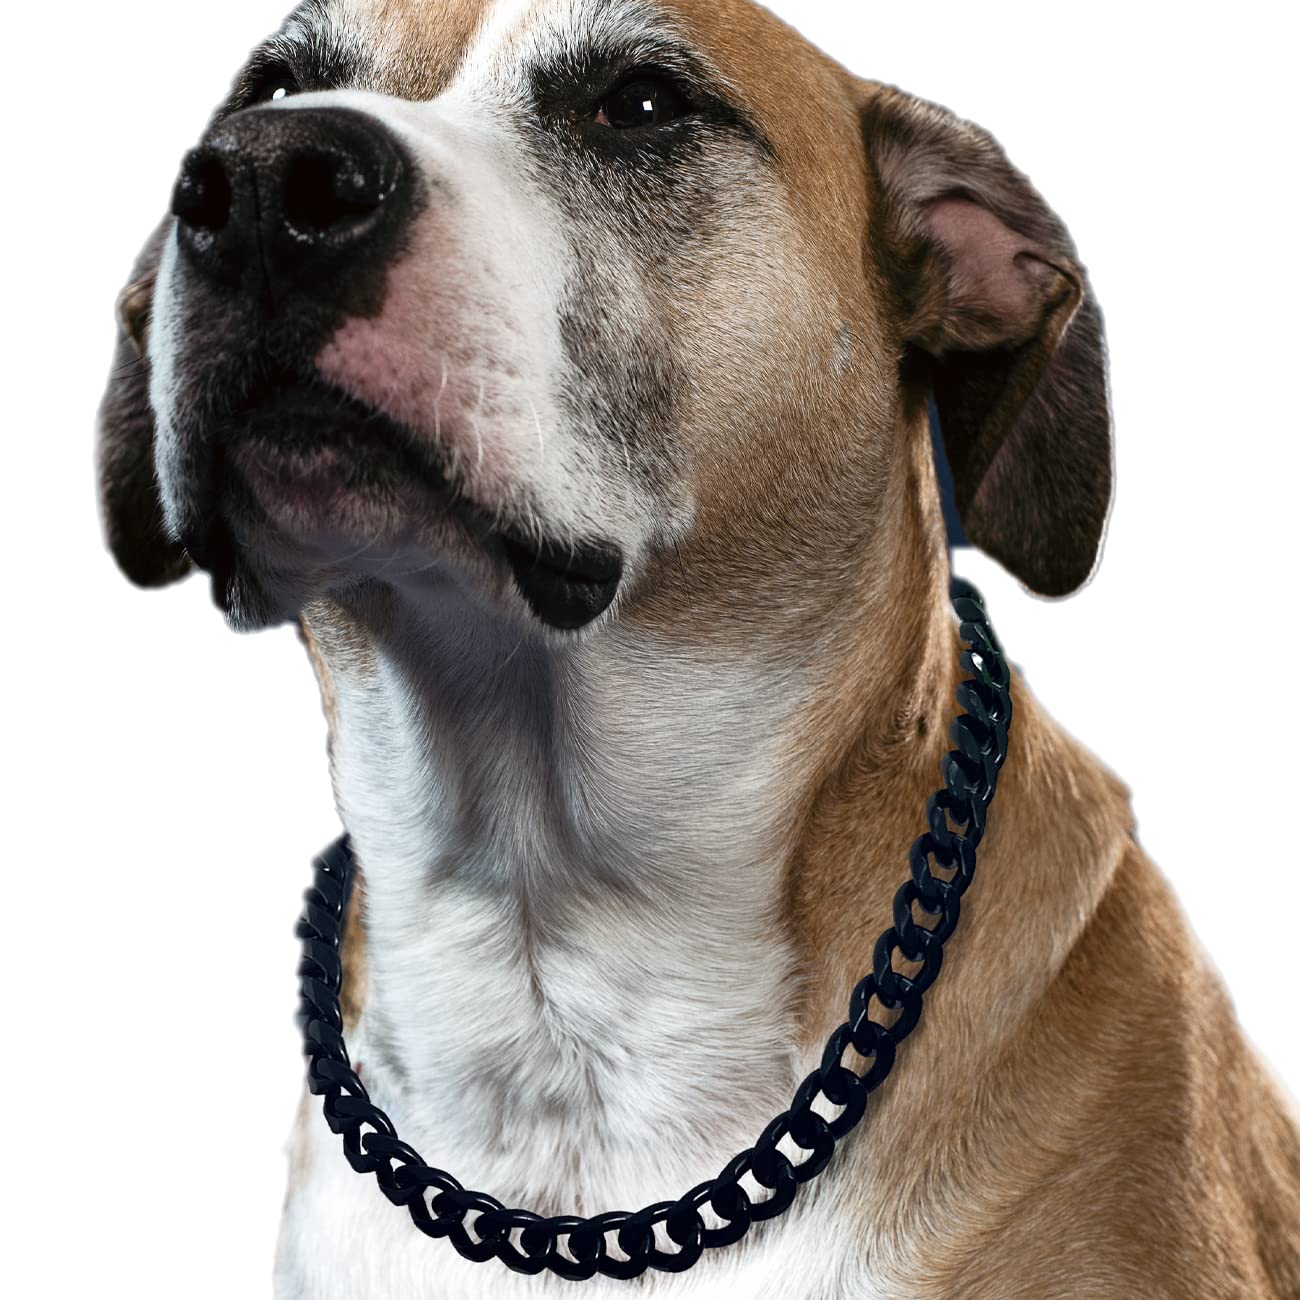 Gold Chain Dog Collar-15mm Cute Dog Collar Pet Gold Necklace Bulldog Light Metal Puppy Jewelry 20" Chain Puppy Costume